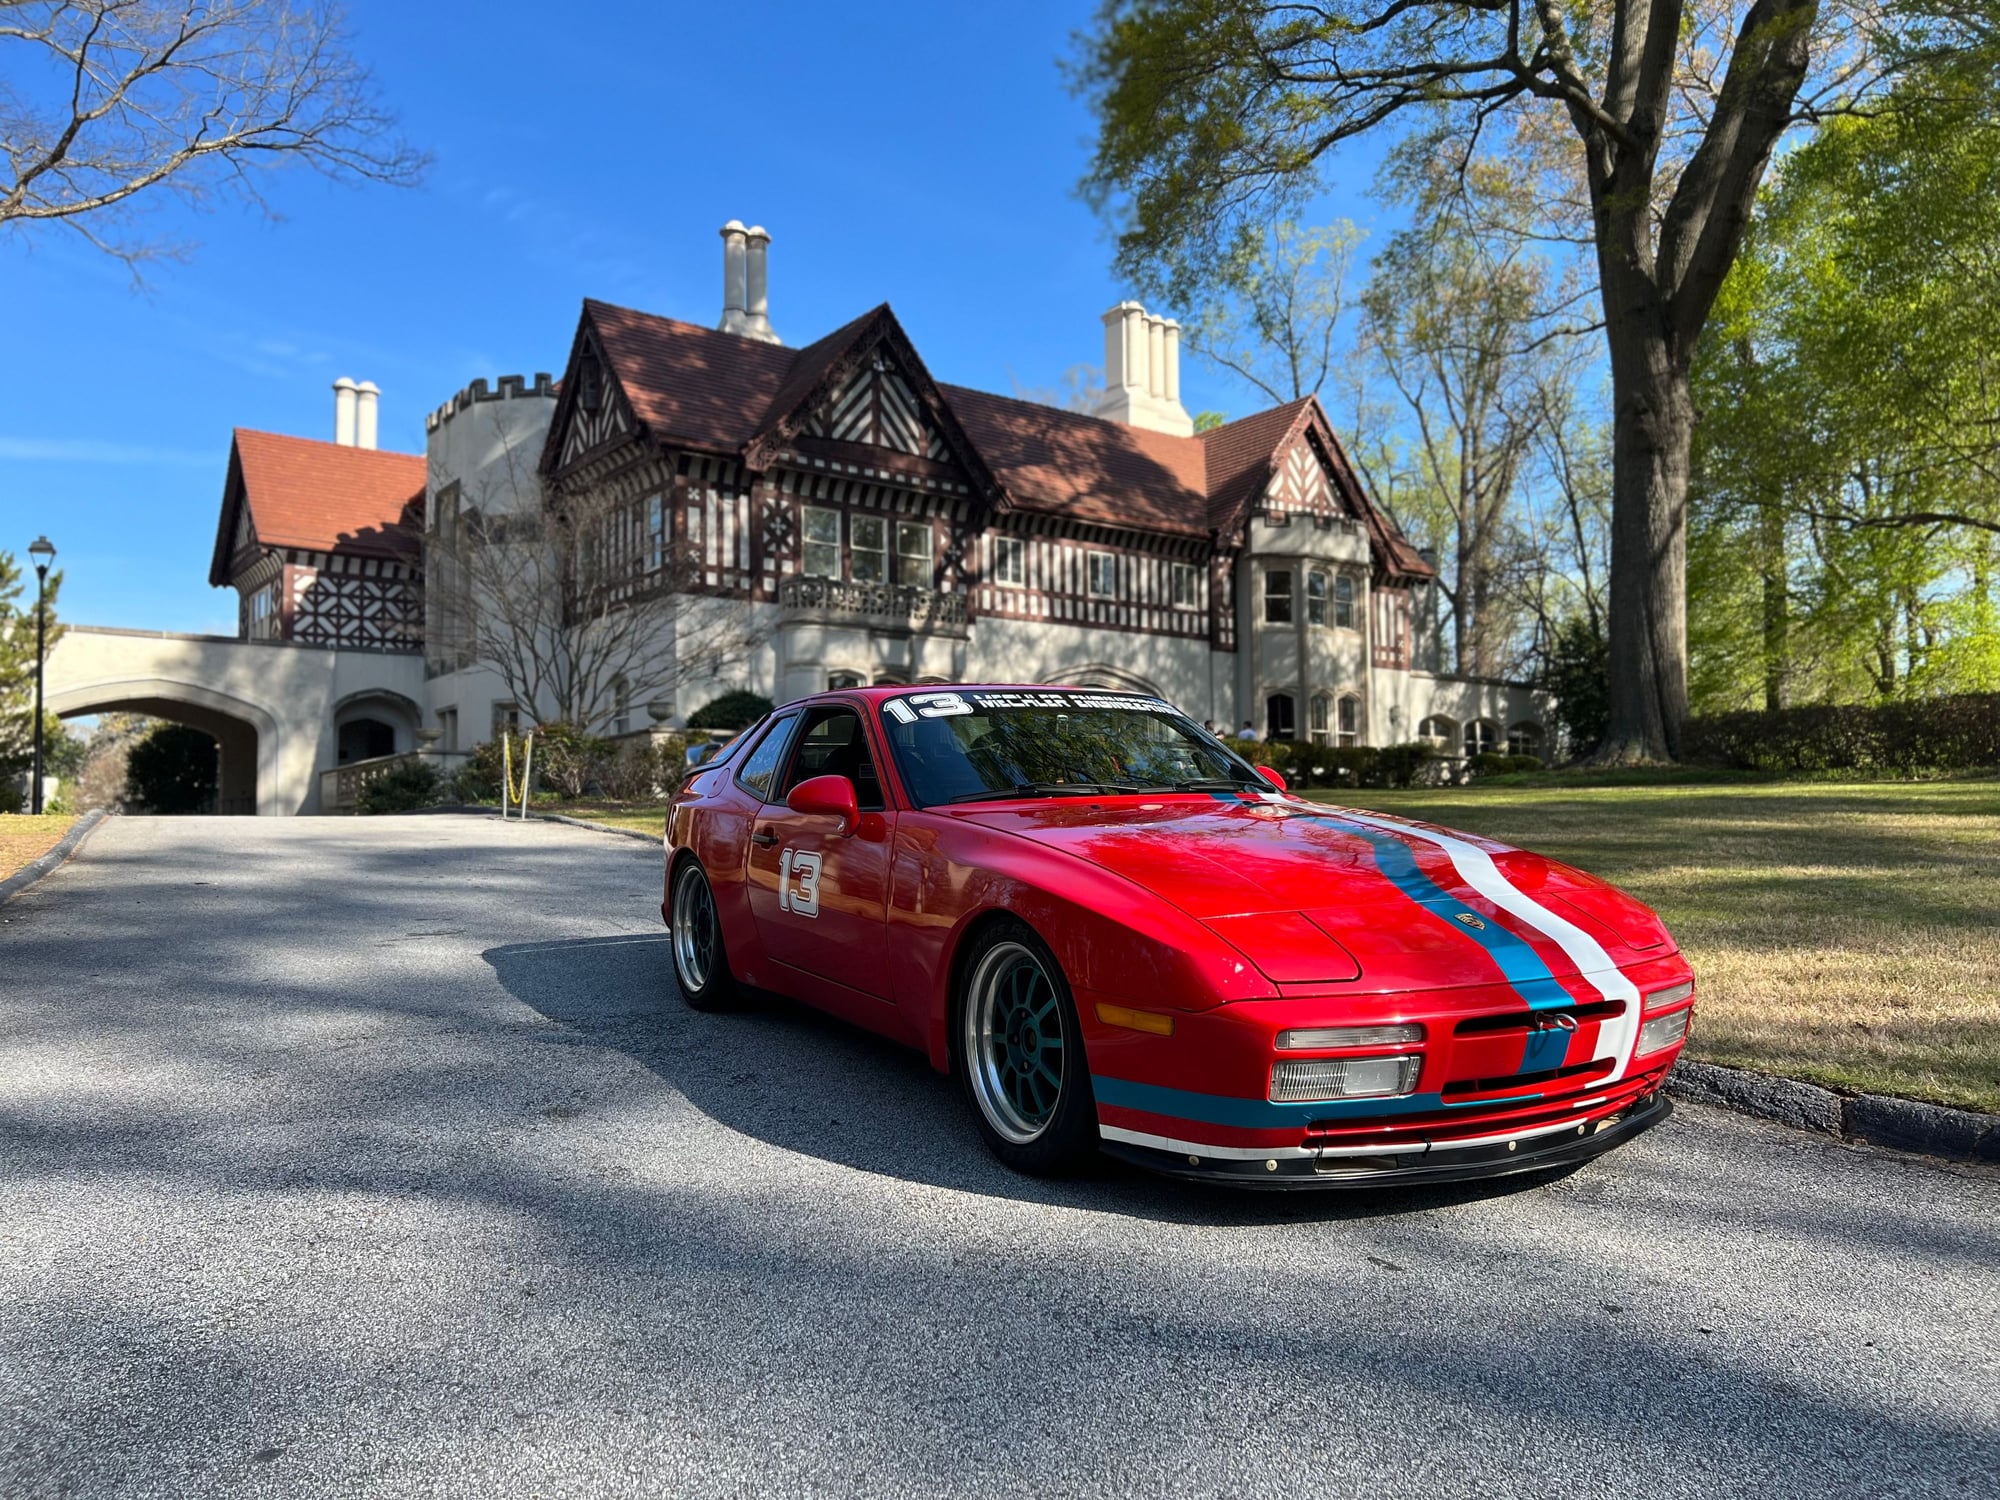 1986 Porsche 944 - Street legal 944 V8 (LS2) 951 track car - Used - VIN WP0AA0954GN155552 - 120,000 Miles - 8 cyl - 2WD - Manual - Coupe - Red - Atlanta, GA 30306, United States